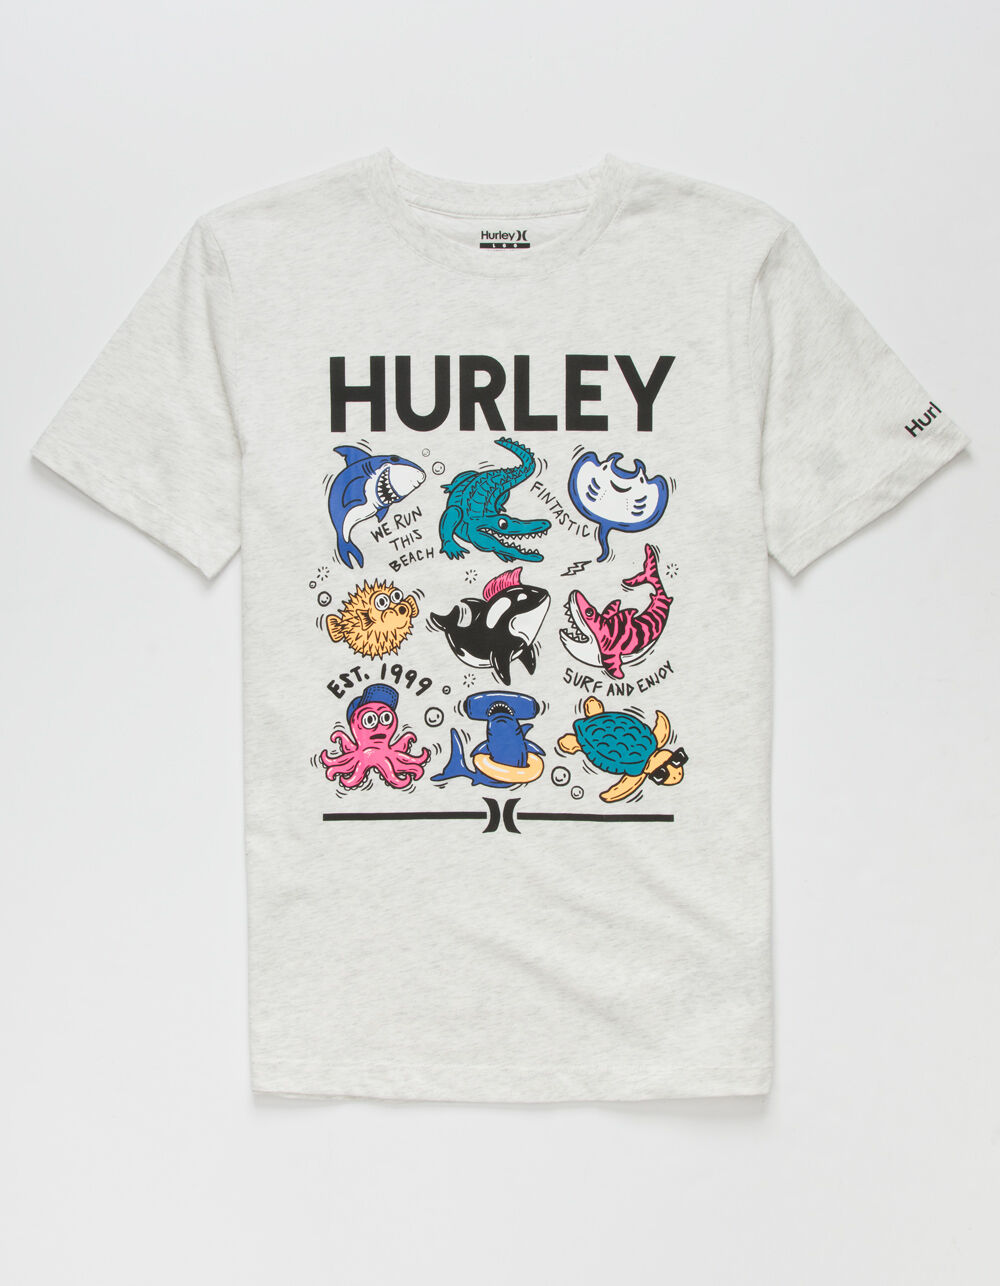 HURLEY Creature Boys T-Shirt image number 0